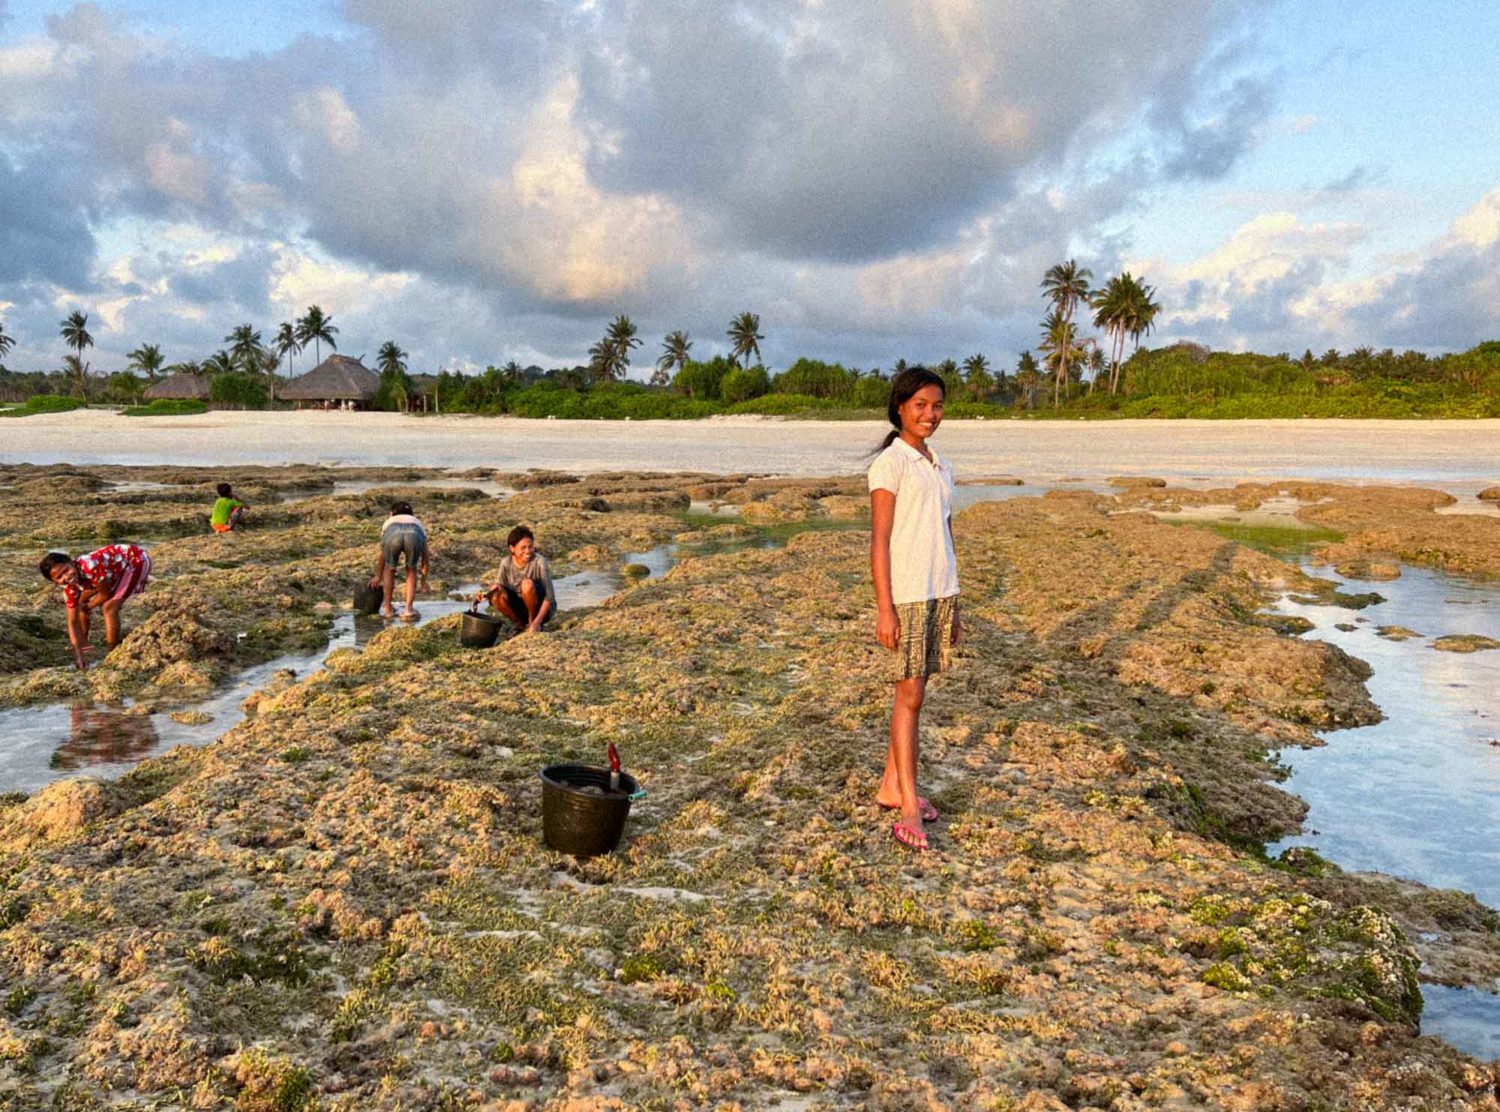 The Sanubari Every day, I’d walk into the reef at low tide to dig up different types of seaweed with the local kids. It was such a beautiful daily ritual. I was happy to learn about this important part of their diet and experience a little bit of the traditional community lifestyle 